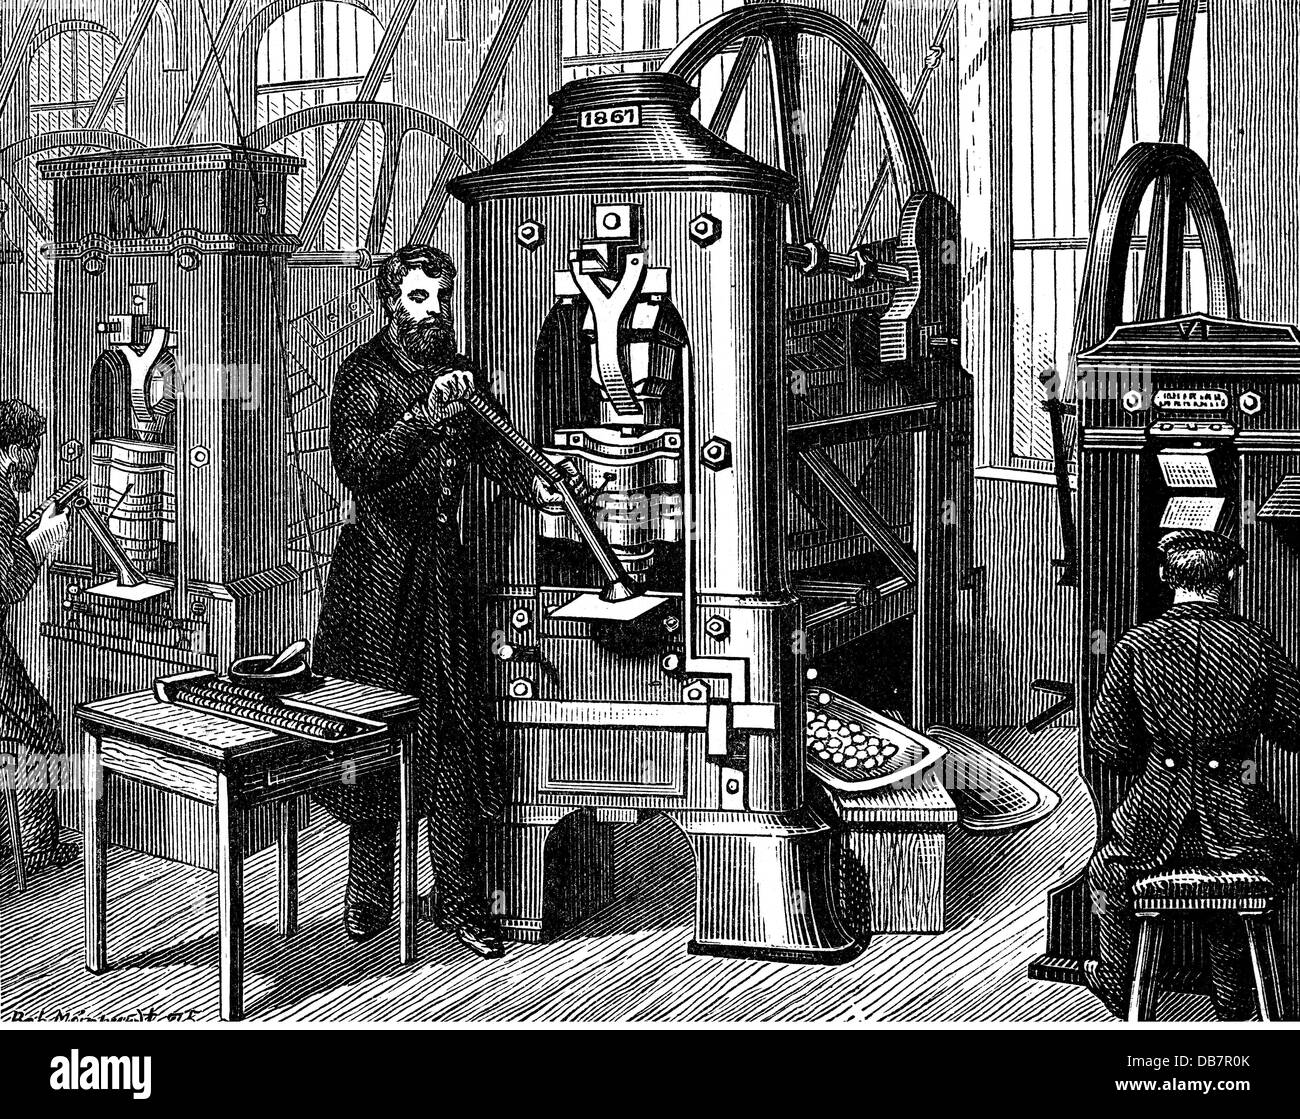 money / finances, mintage, machines for stamping coins made of silver and copper at the Royal Mint, Berlin, after Rob.Meinhardt, 1875, wood engraving, by Richard Brend'amour (1831 - 1915), from: 'Illustrirtes Konversations - Lexikon', Otto Spamer publishing house, Leipzig, 1870 - 1882, Additional-Rights-Clearences-Not Available Stock Photo